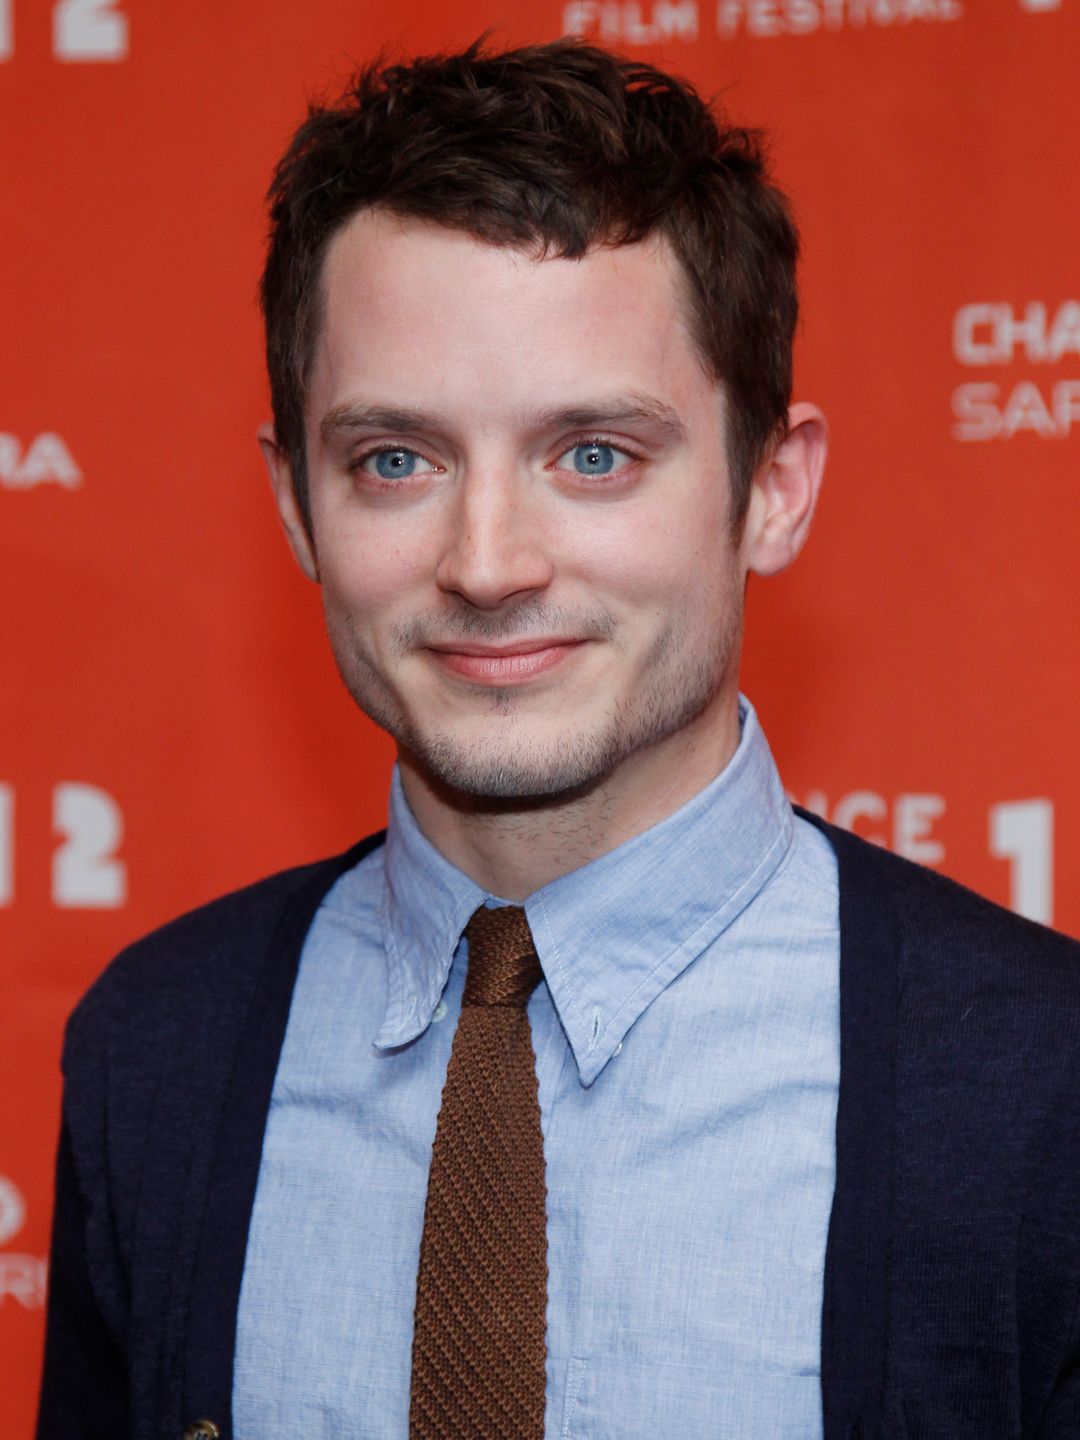 Elijah Wood who is his mother